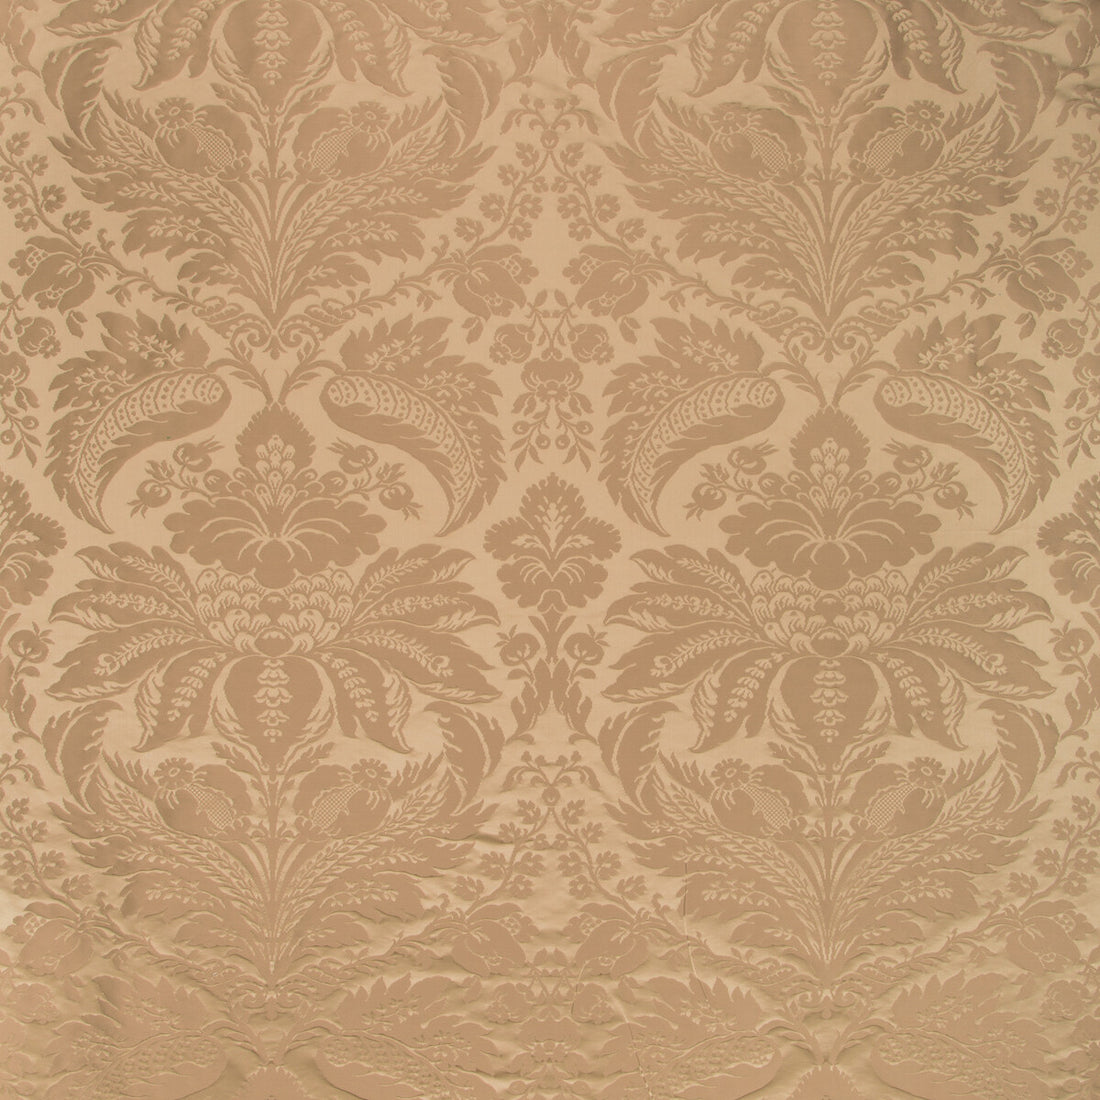 Damask Pierre fabric in allspice color - pattern 8013188.68.0 - by Brunschwig &amp; Fils in the B&amp;F Showroom Exclusive 2019 collection